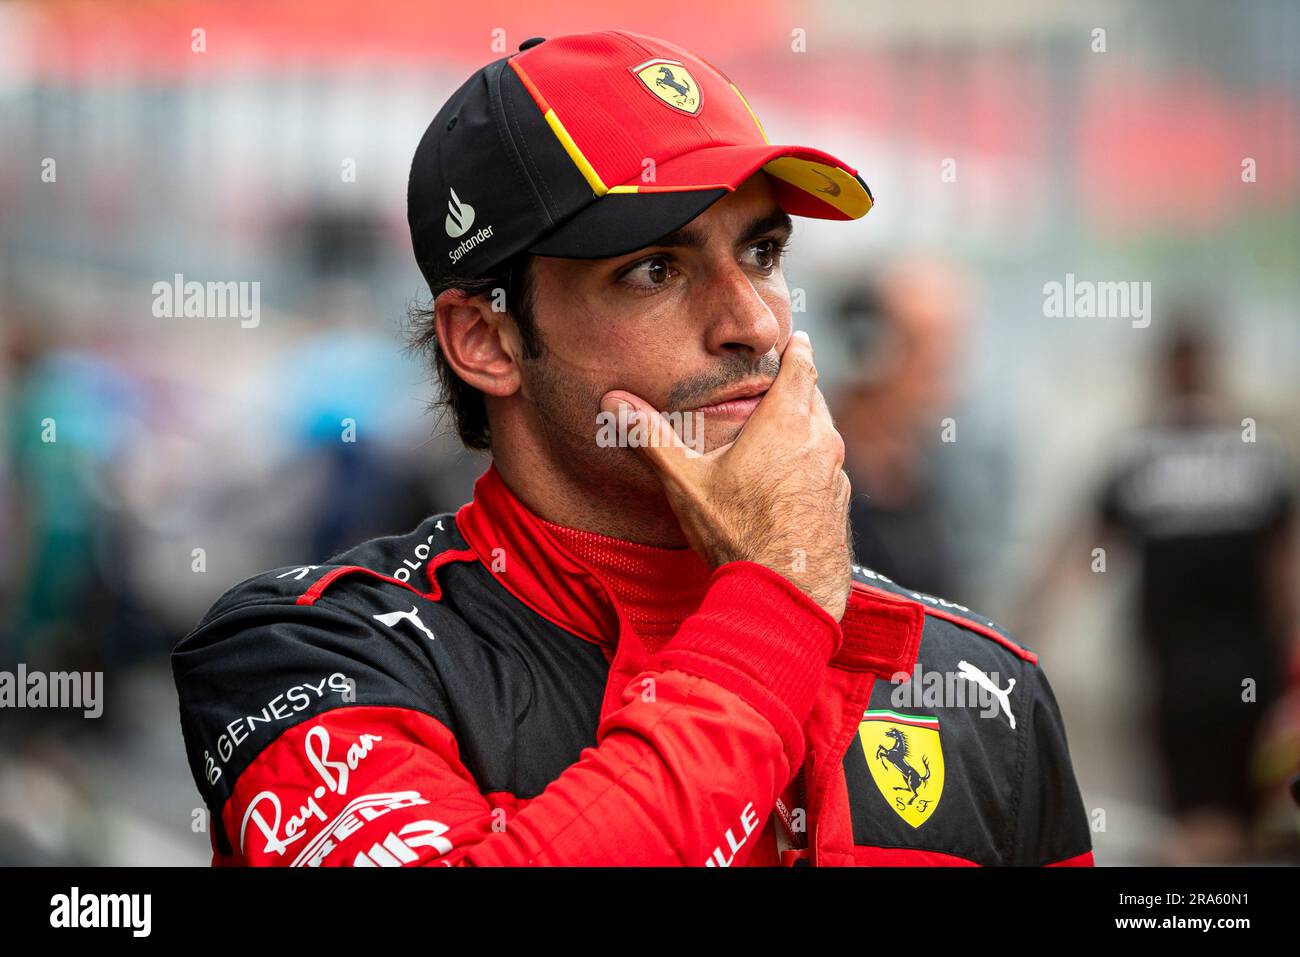 Spielberg, Austria. 30th June, 2023. Scuderia Ferrari's Spanish driver Carlos Sainz seen after the qualifying session during the Austrian F1 Grand Prix at the Red Bull Ring. Due to the new sprint format Grand Prix weekend, drivers had only one free practice and qualifying session already on Friday afternoon. Red Bull Racing's Dutch driver Max Verstappen took the pole position for Sunday's Grand Prix race, followed by Ferrari's Monegasque driver Charles Leclerc and Spanish driver Carlos Sainz. Credit: SOPA Images Limited/Alamy Live News Stock Photo